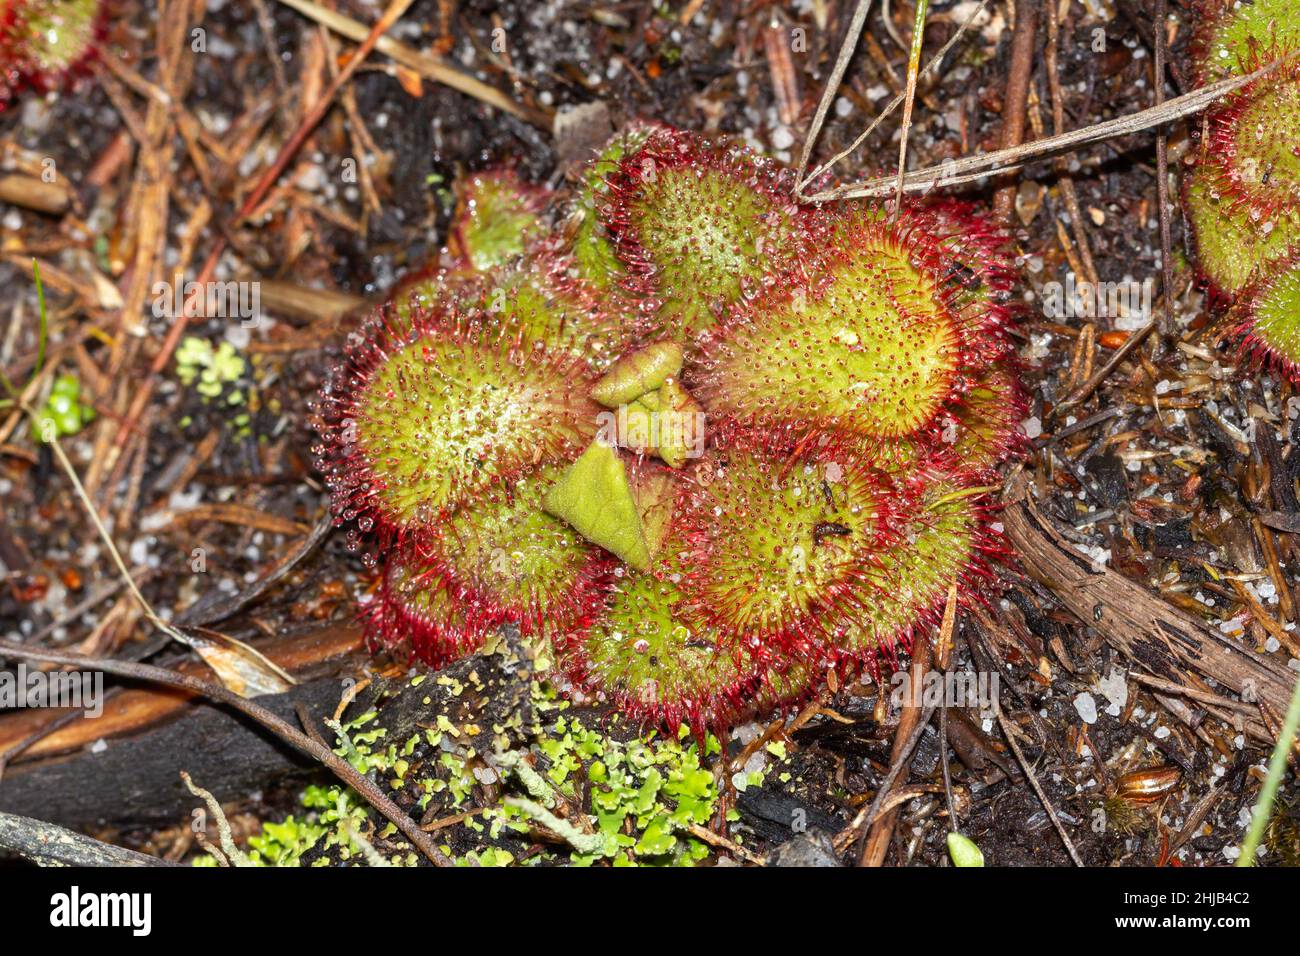 Drosera cuneifolia on the Table Mountain in Cape Town, Western Cape of South Africa Stock Photo